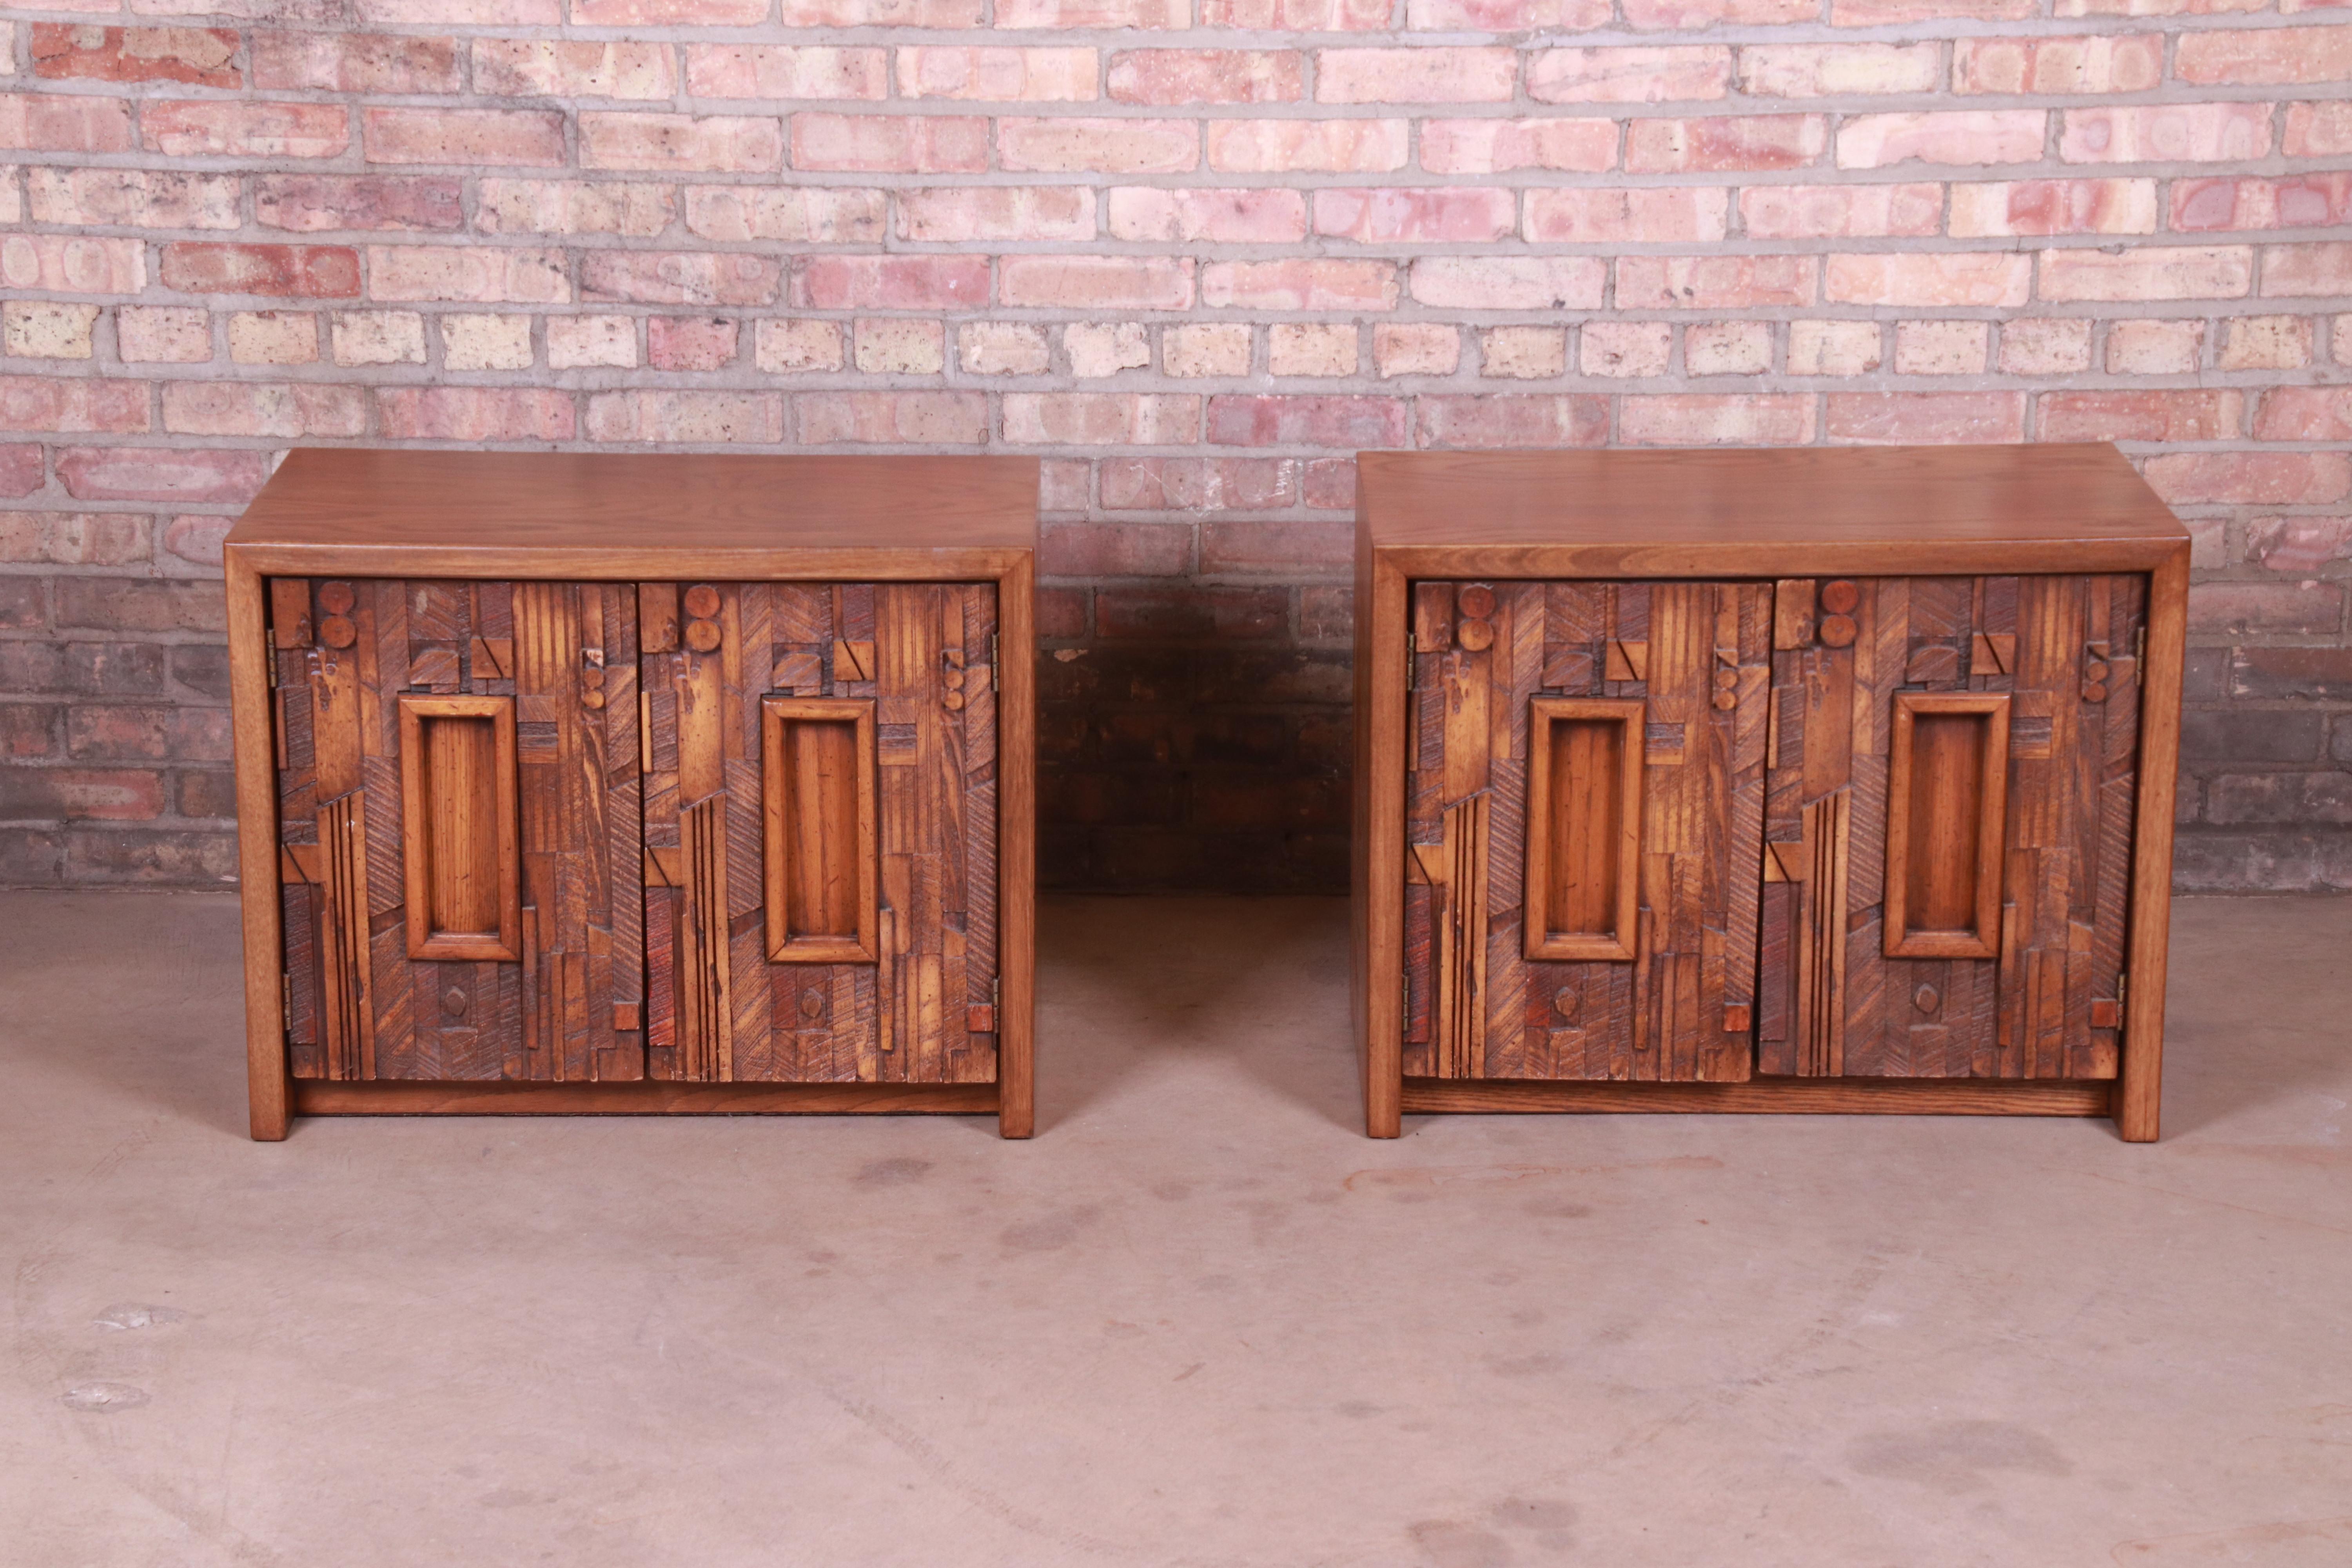 An exceptional pair of Mid-Century Modern Brutalist oak nightstands or side tables

In the manner of Paul Evans

By Lane Furniture 